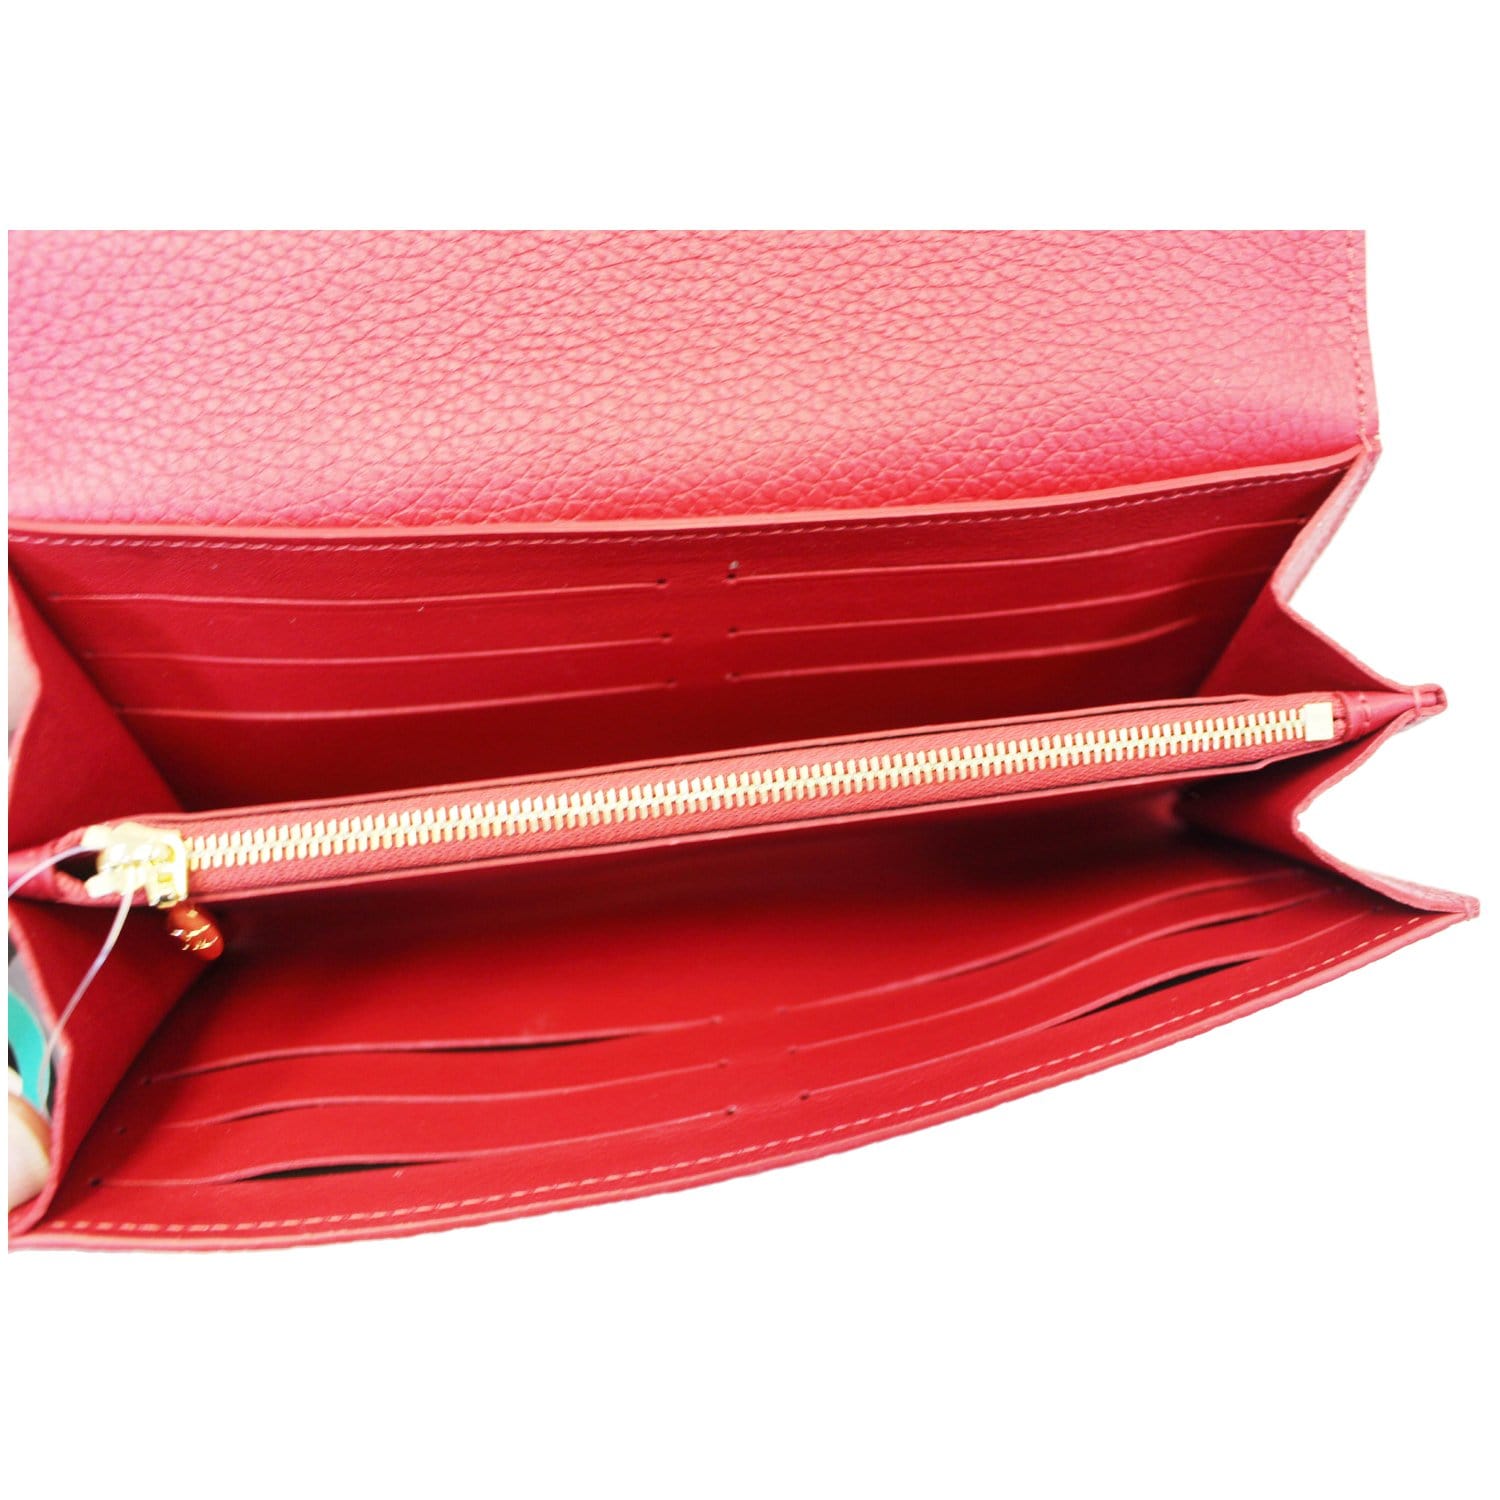 Brand New LV Capucines Compact Wallet in Red Ecarlate Taurillon Leather